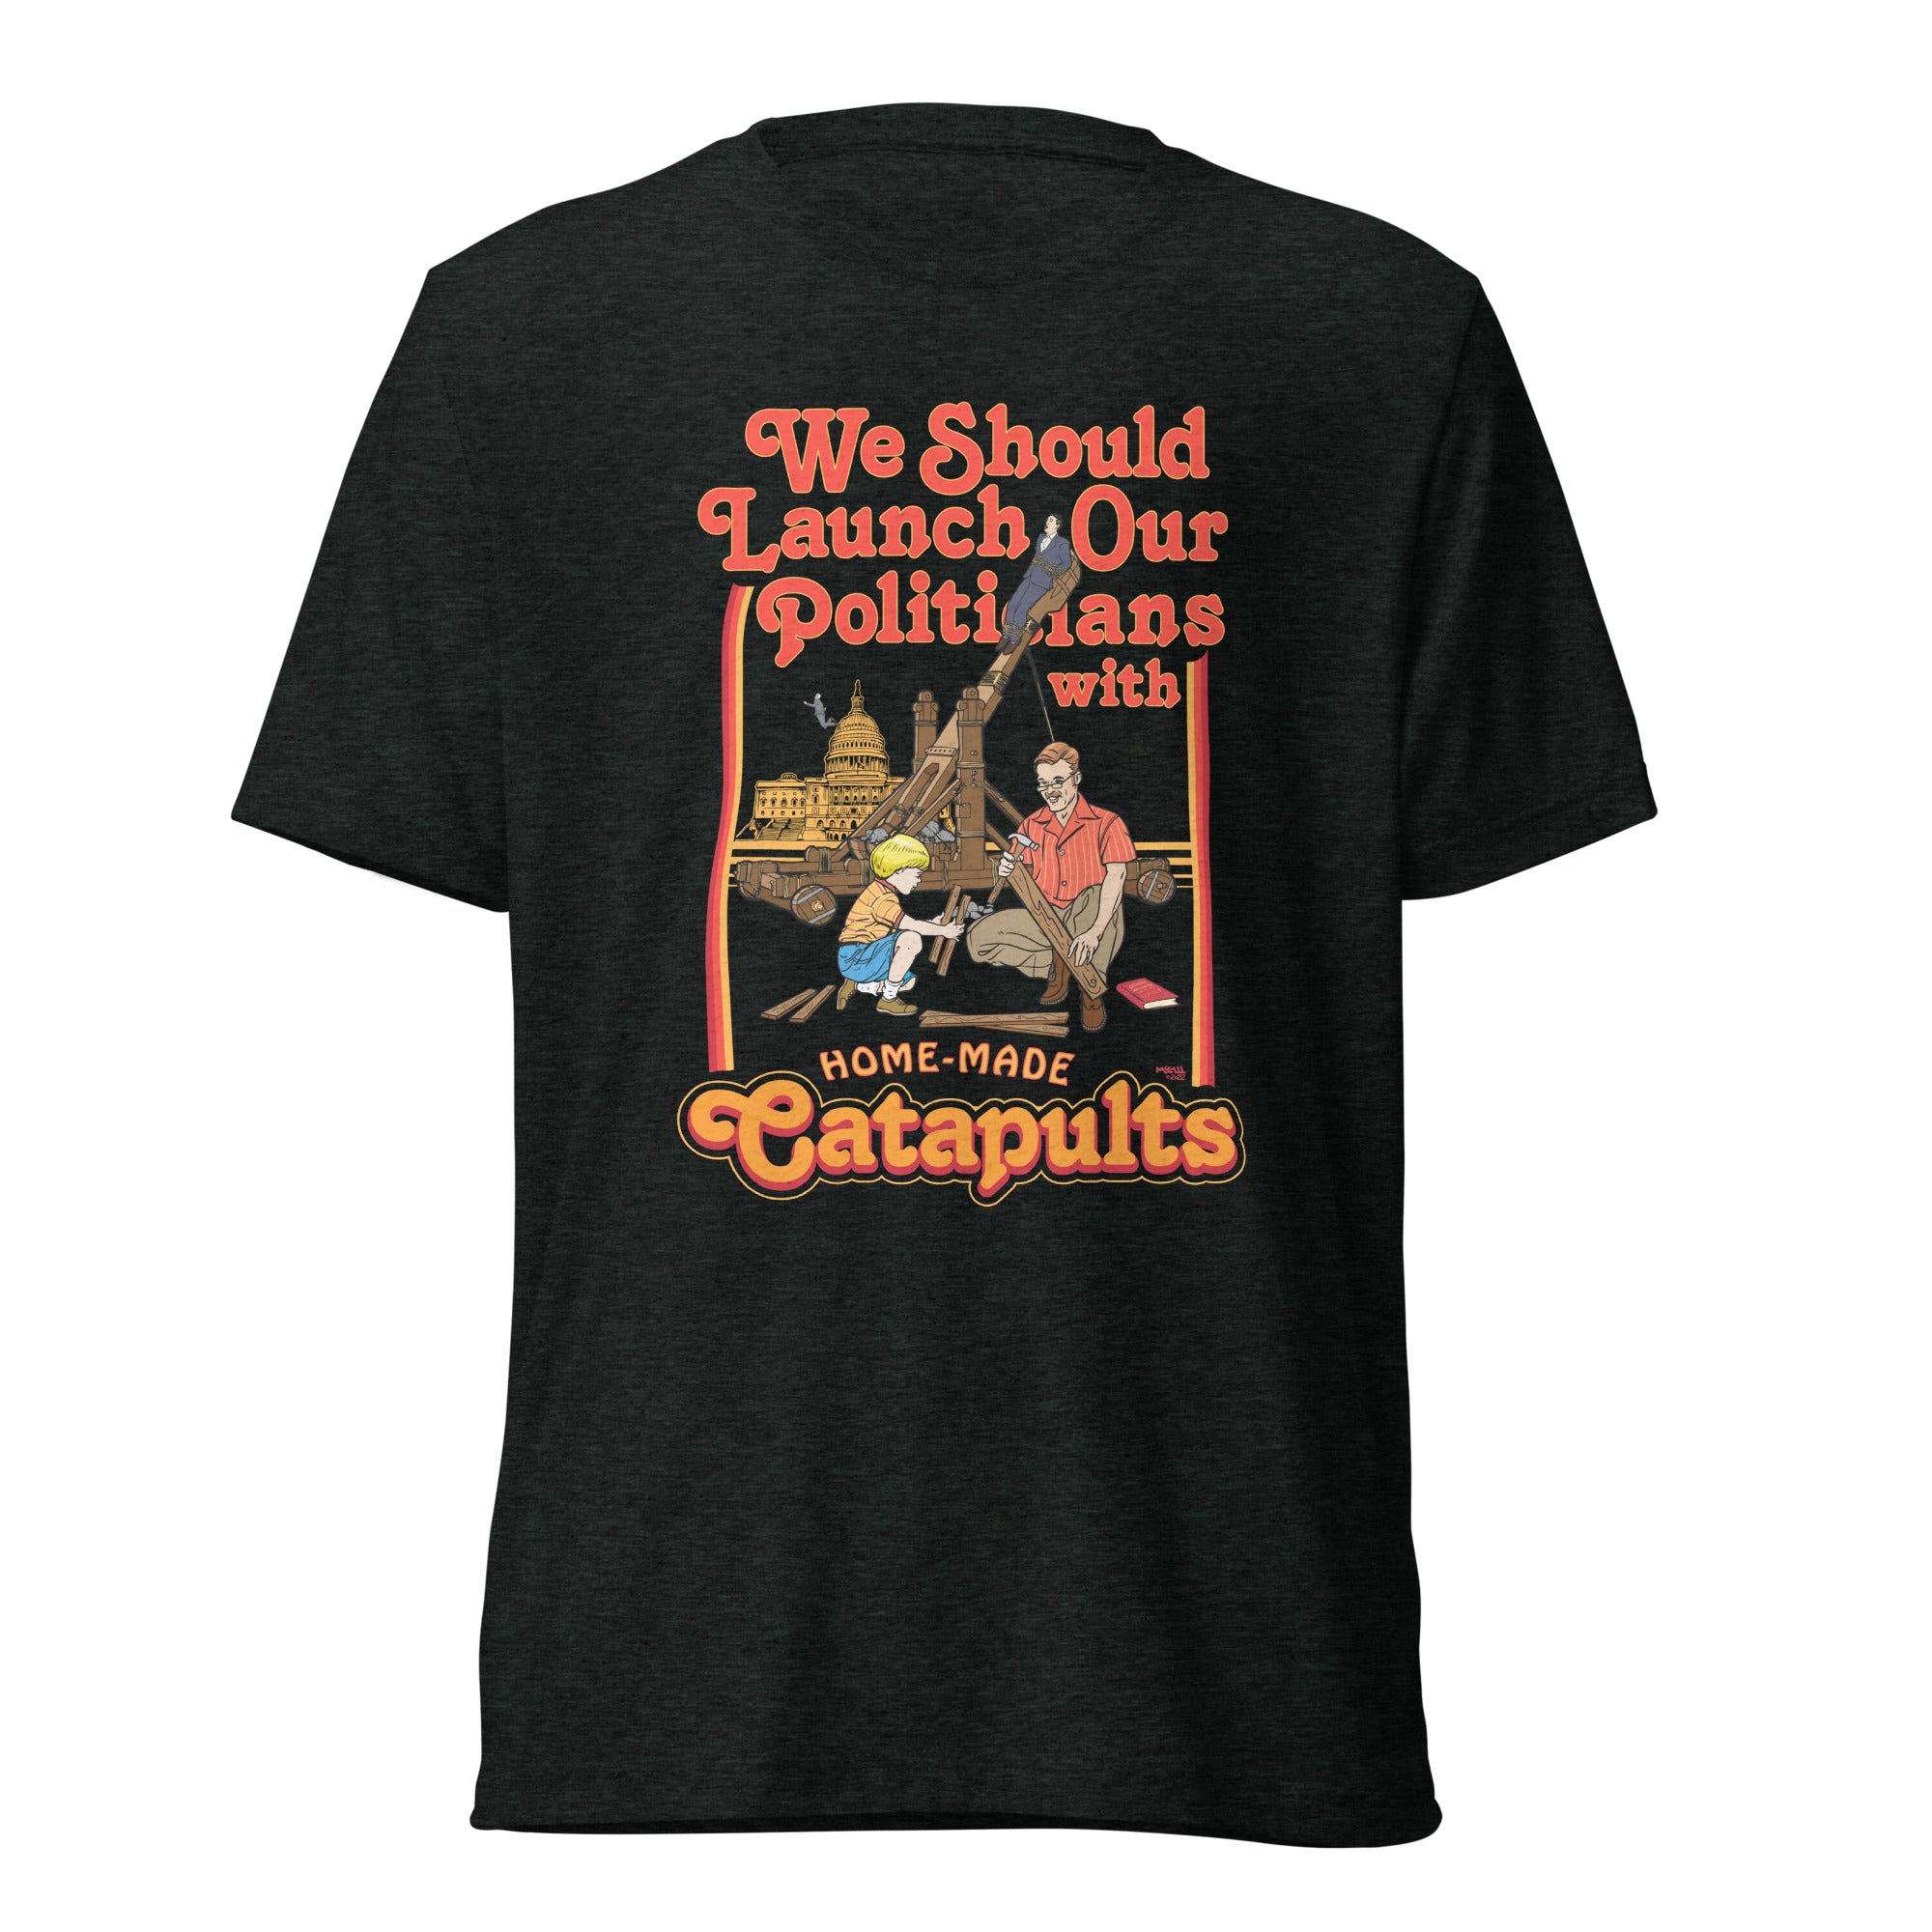 We Should Launch Politicians from Catapults Tri-blend T-shirt